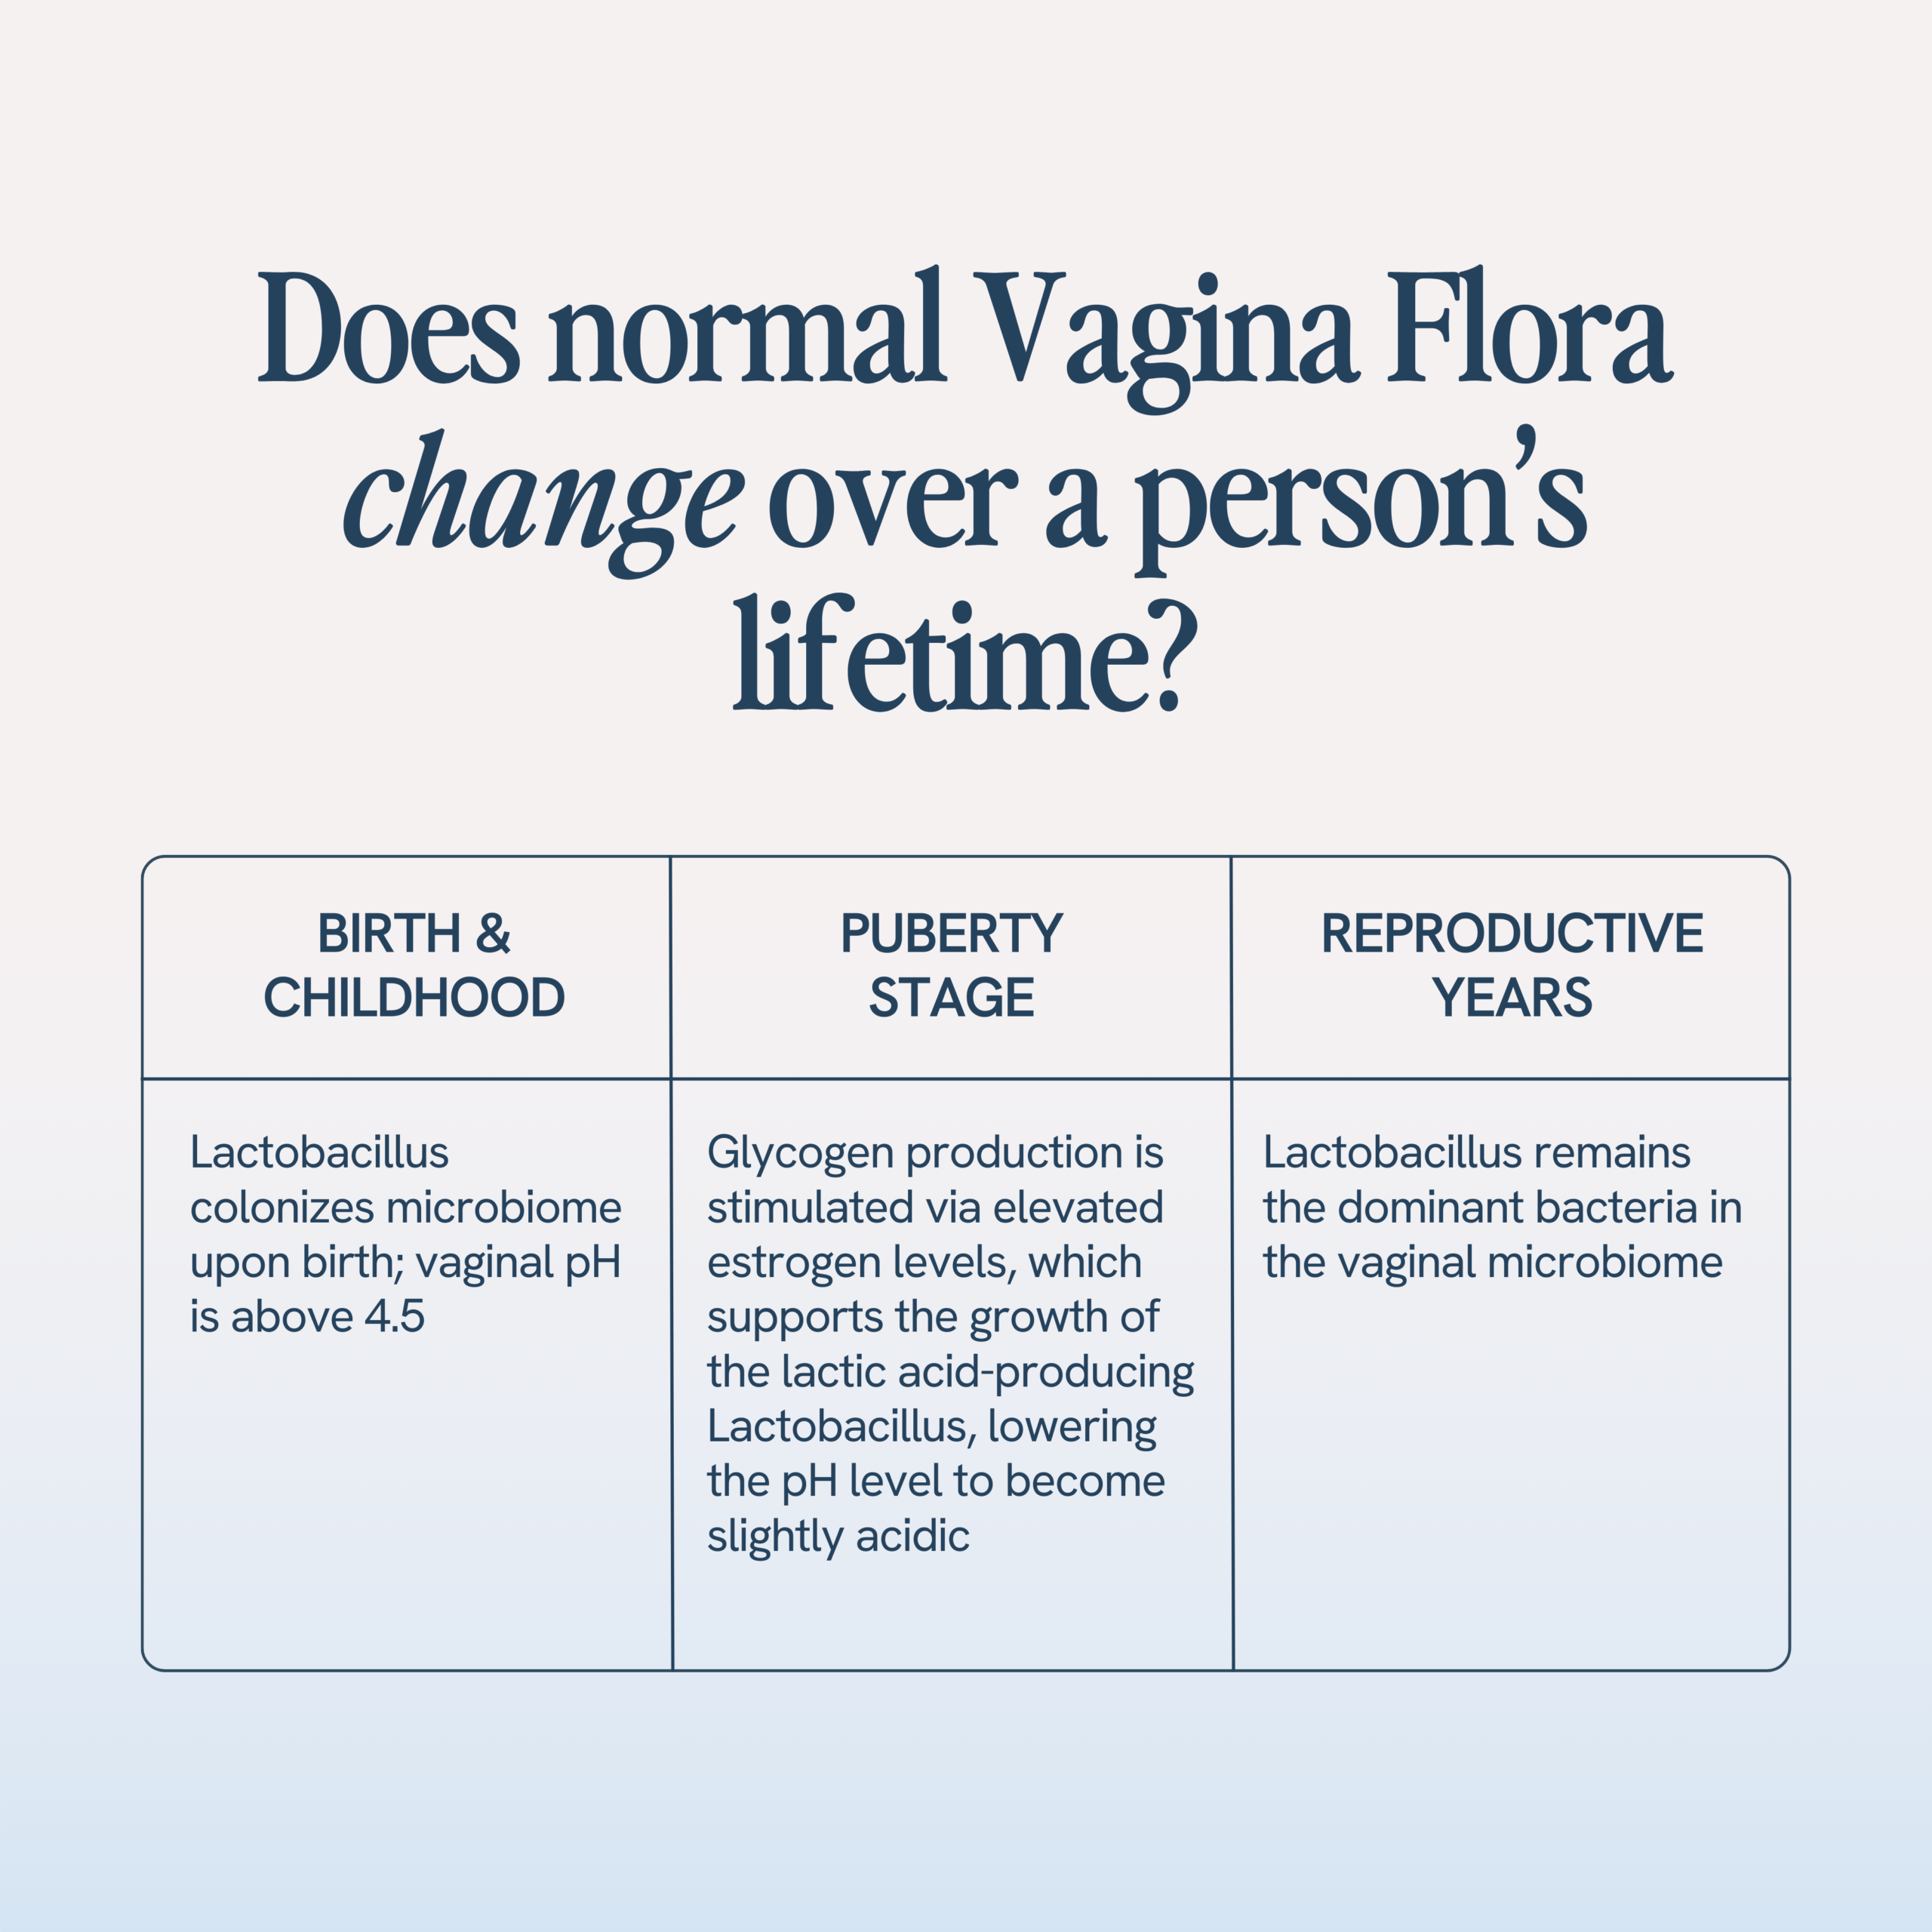 Does normal Vagina Flora change over a person’s lifetime?" with a three-part answer detailing the vaginal microbiome changes during 'Birth & Childhood,' 'Puberty Stage,' and 'Reproductive Years,' focusing on the role and changes in Lactobacillus levels and vaginal pH.






